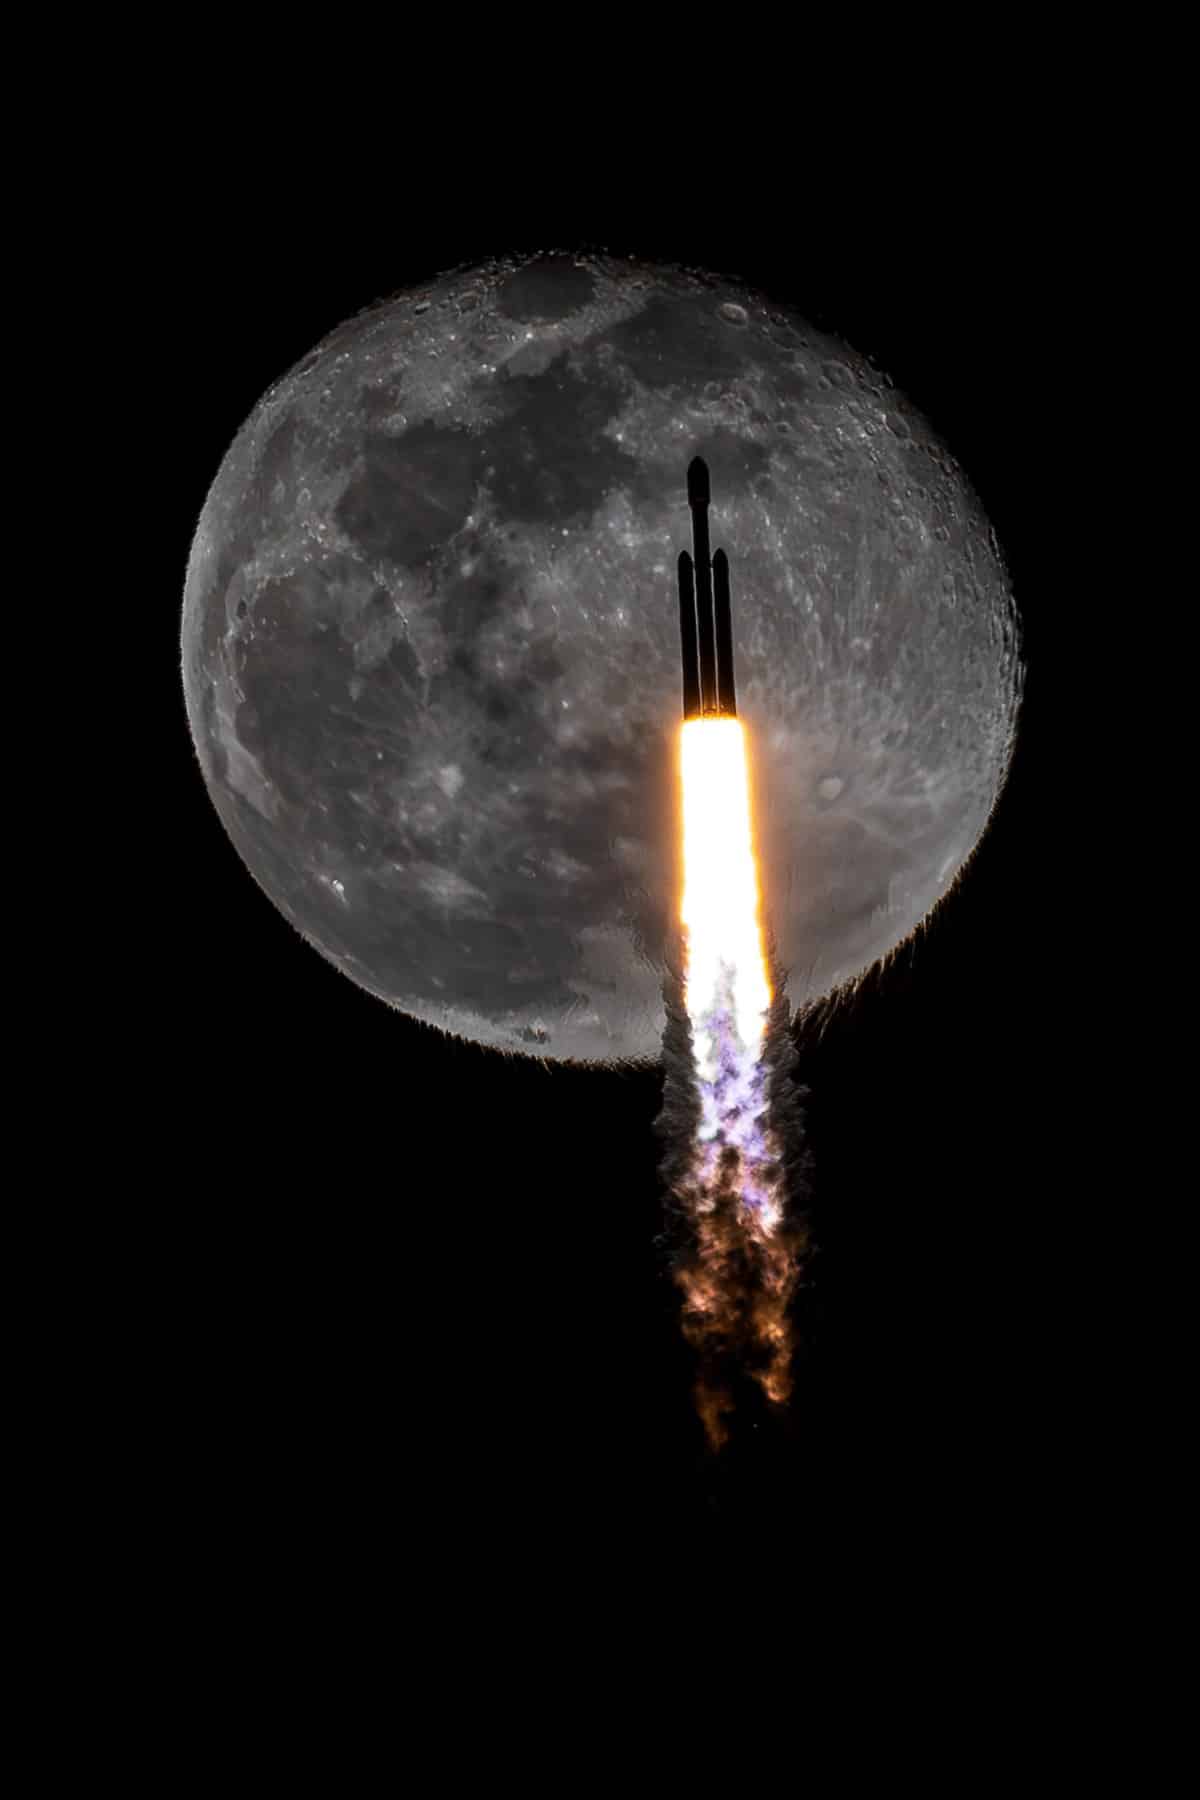 SpaceX Falcon Heavy rocket transits the moon carrying the X-37B space plane into orbit